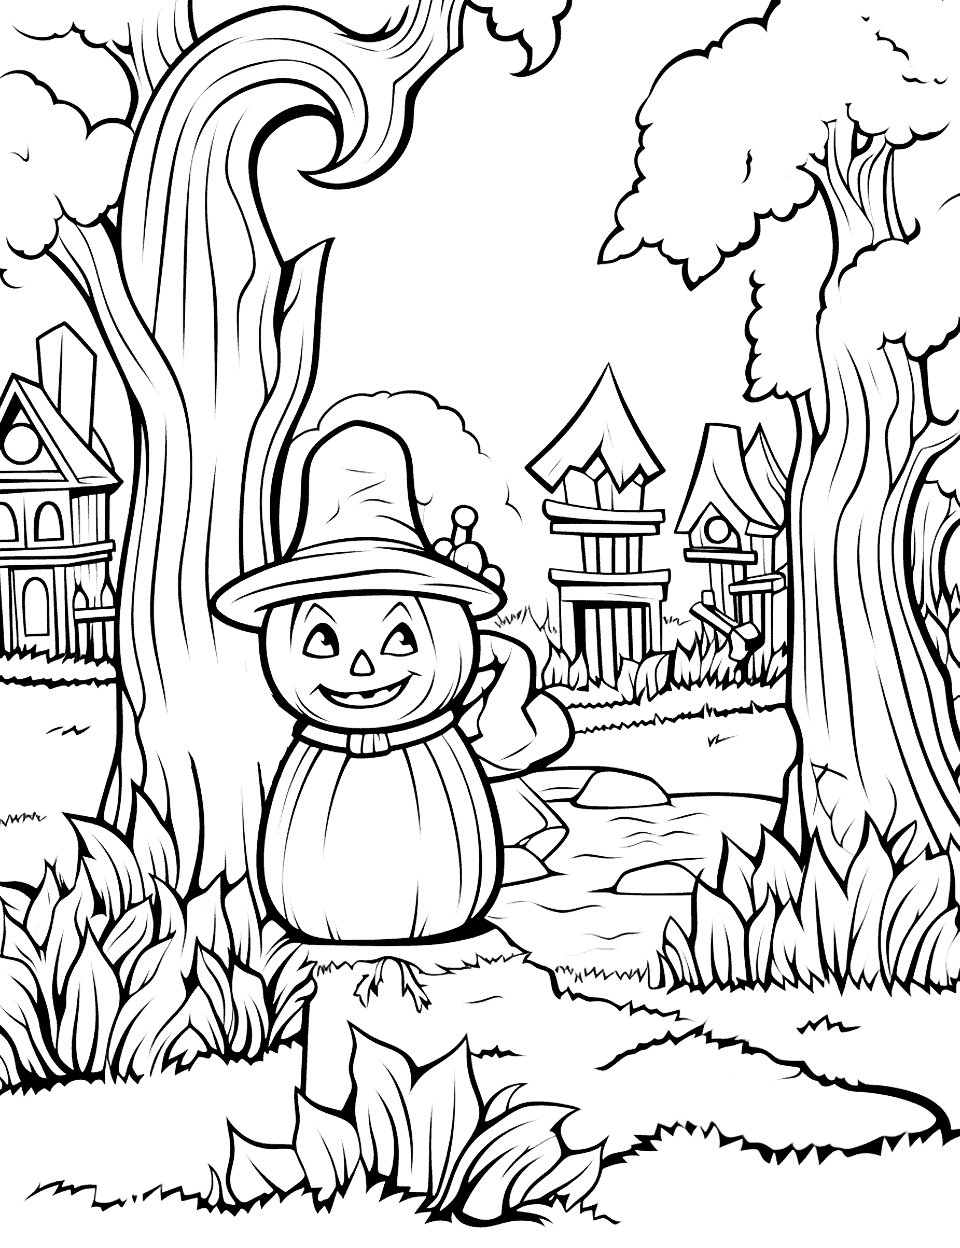 Creepy Yard Scene Halloween Coloring Page - A detailed, spooky yard with trees scene, perfect for older children who love to immerse themselves in coloring.